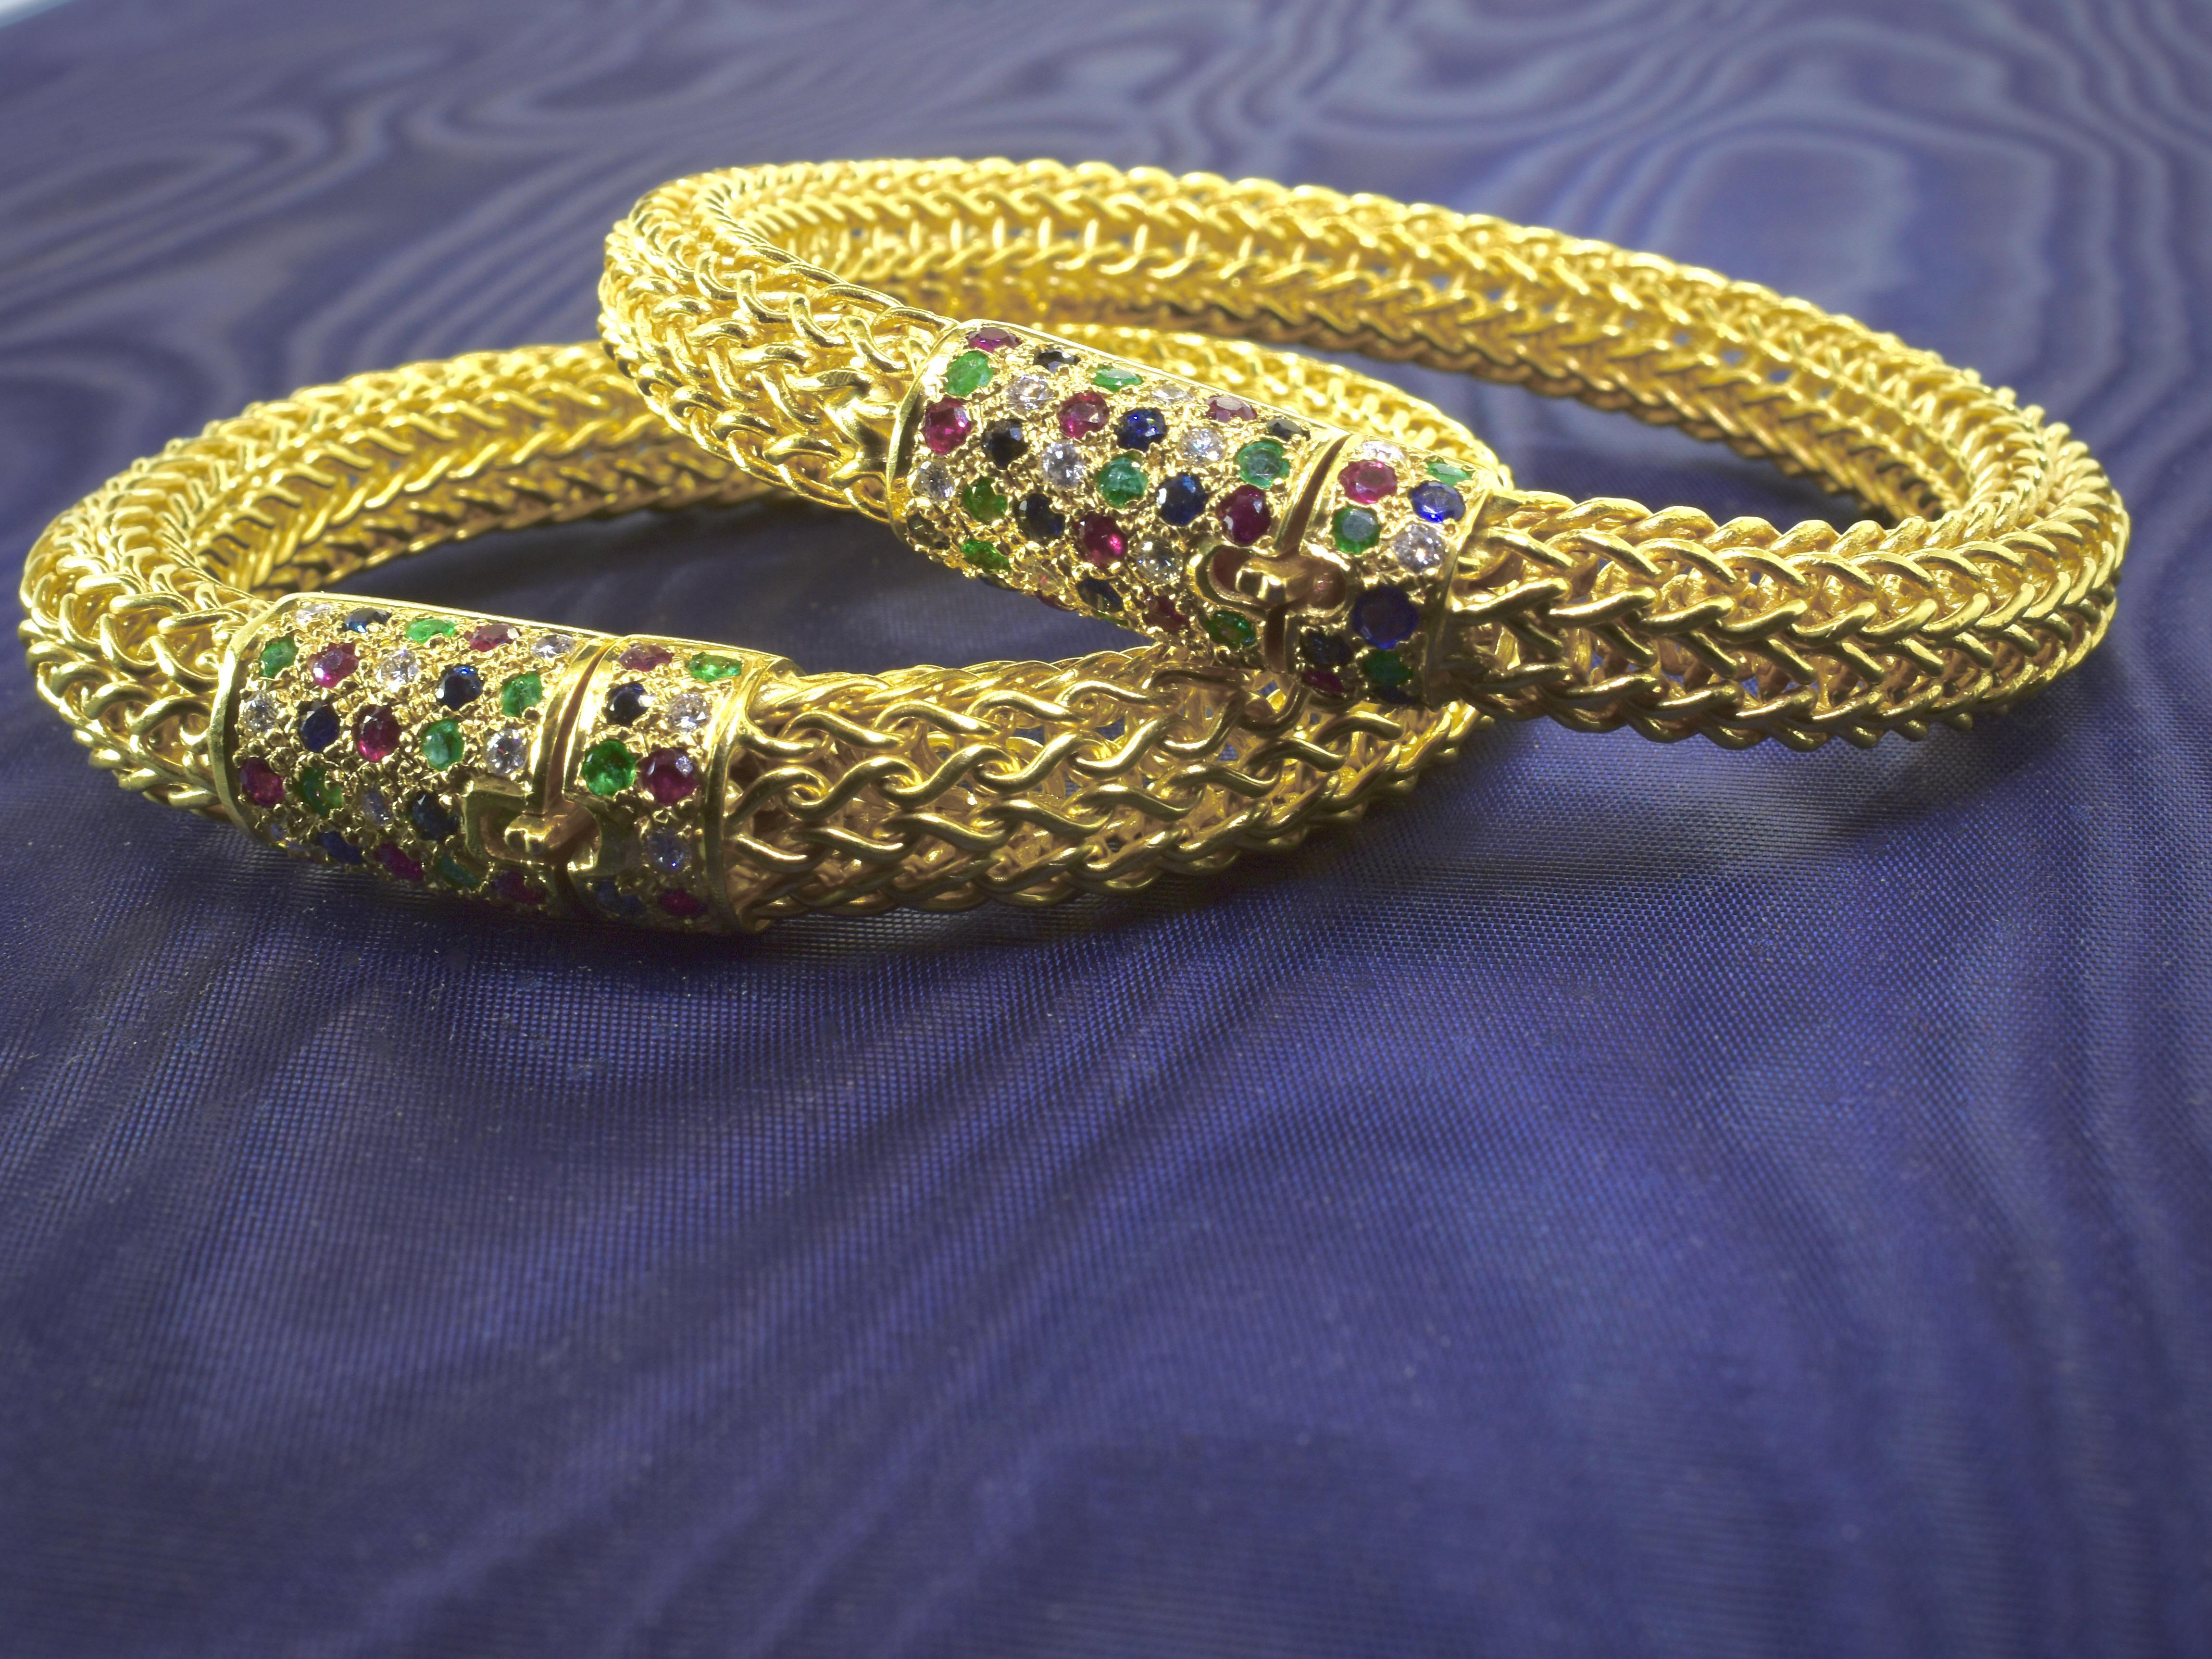 Yellow Gold, Diamond, Sapphire, Ruby & Emerald Pair of Vintage Bracelets c 1960s For Sale 3